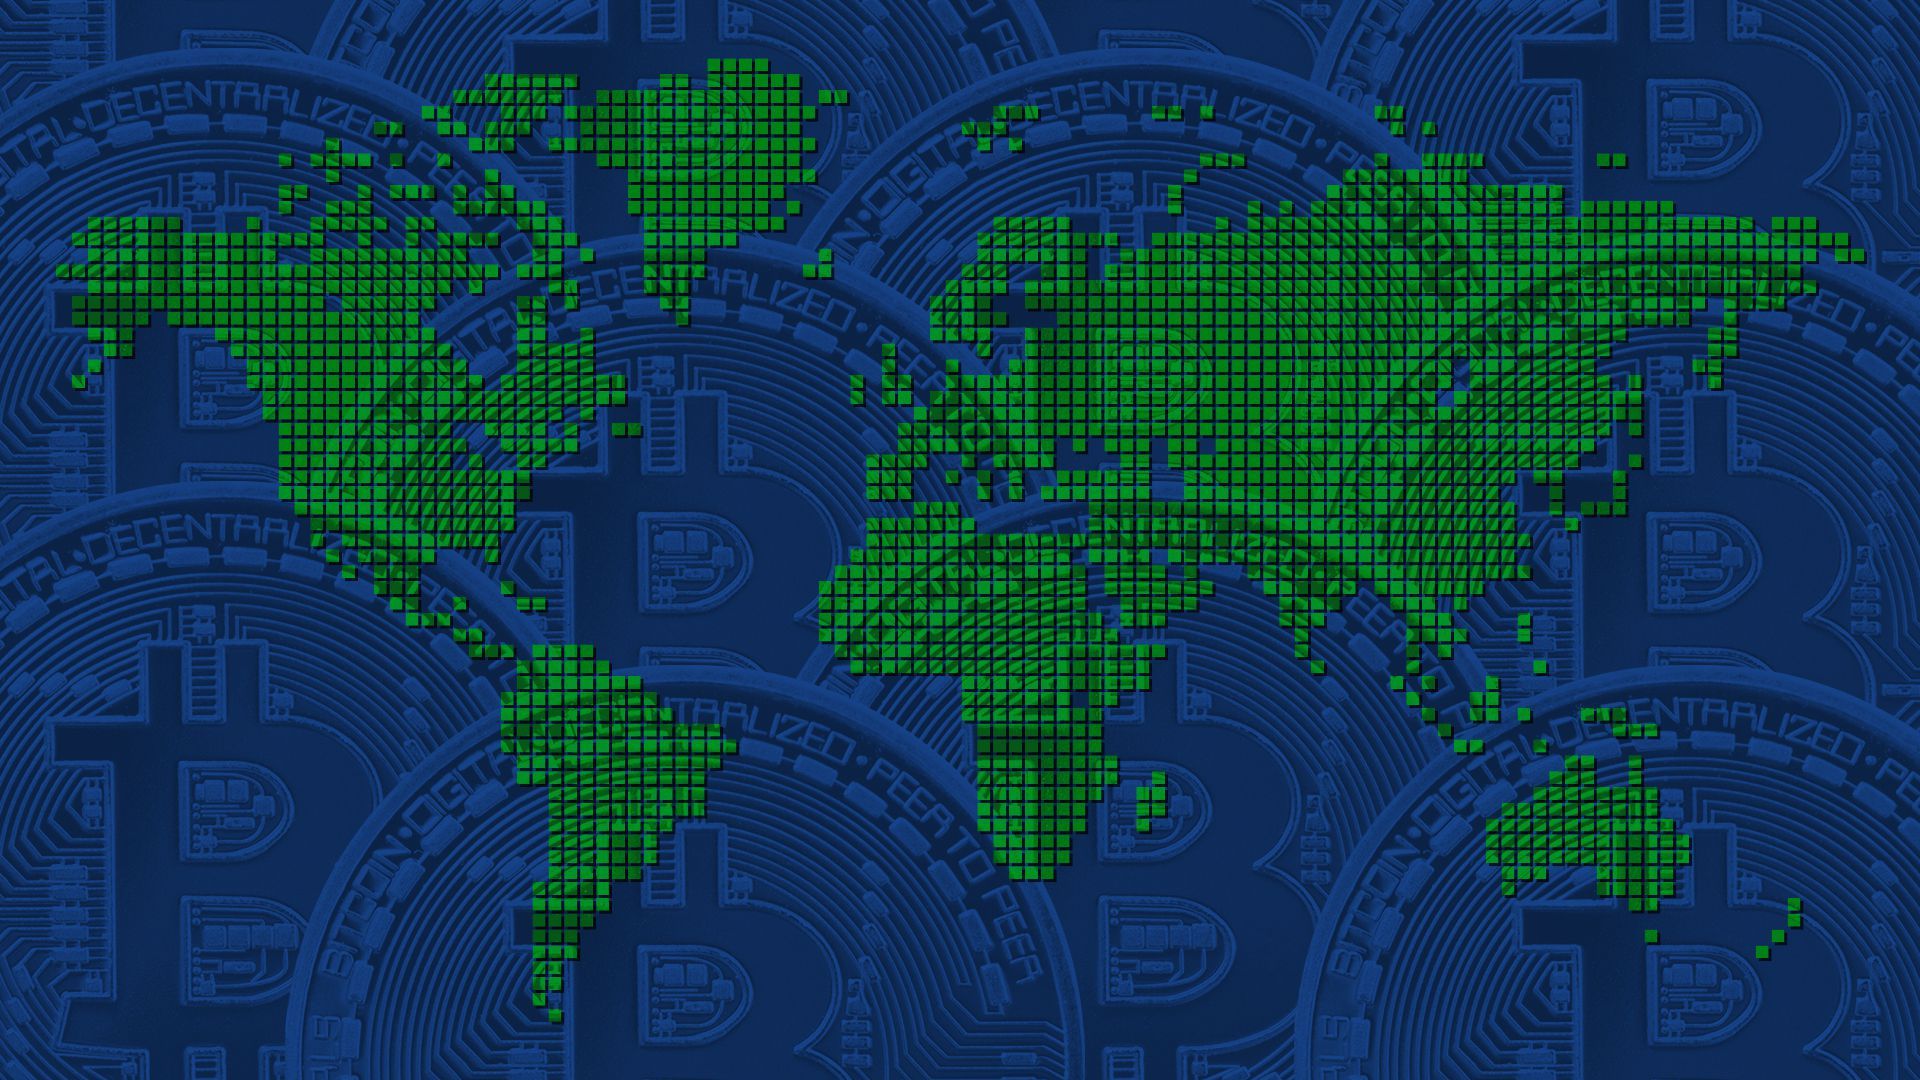 Illustration of a pixelated world map overtop an image of a bitcoin pattern.